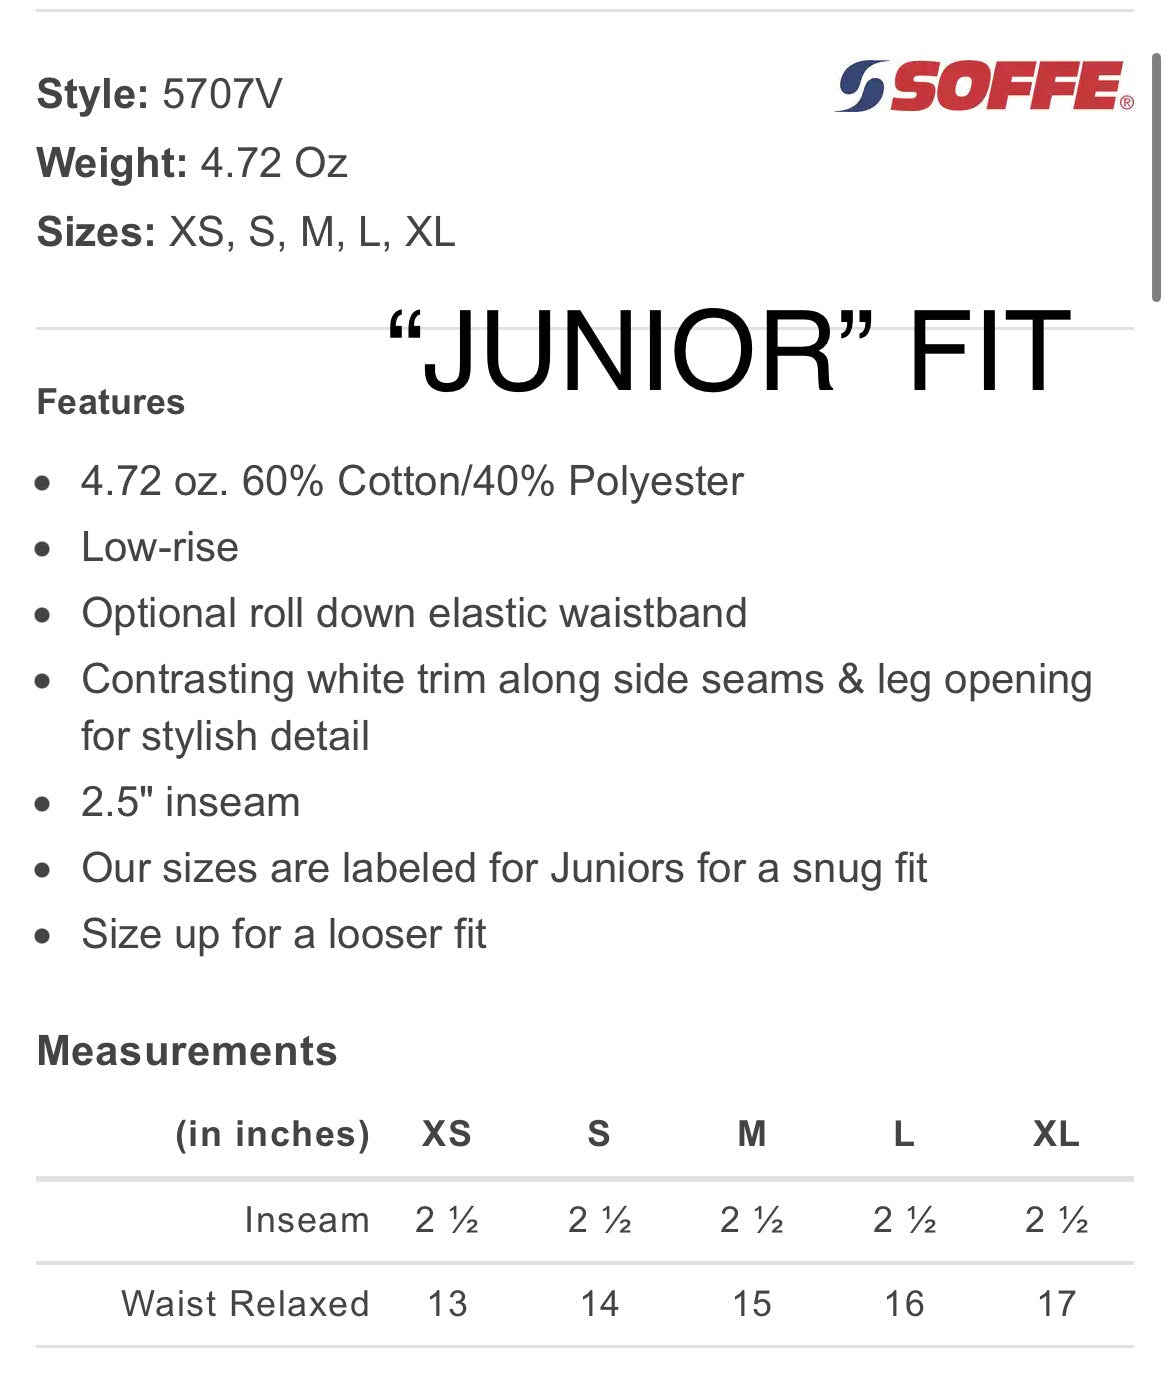 4.72 oz. 60% Cotton/40% Polyester
Low-rise
2.5" inseam
Our sizes are labeled for Juniors for a snug fit
Size up for a looser fit
Measurements
(in inches)	XS	S	M	L	XL
Inseam	2 ½	2 ½	2 ½	2 ½	2 ½
Waist Relaxed	13	14	15	16	17